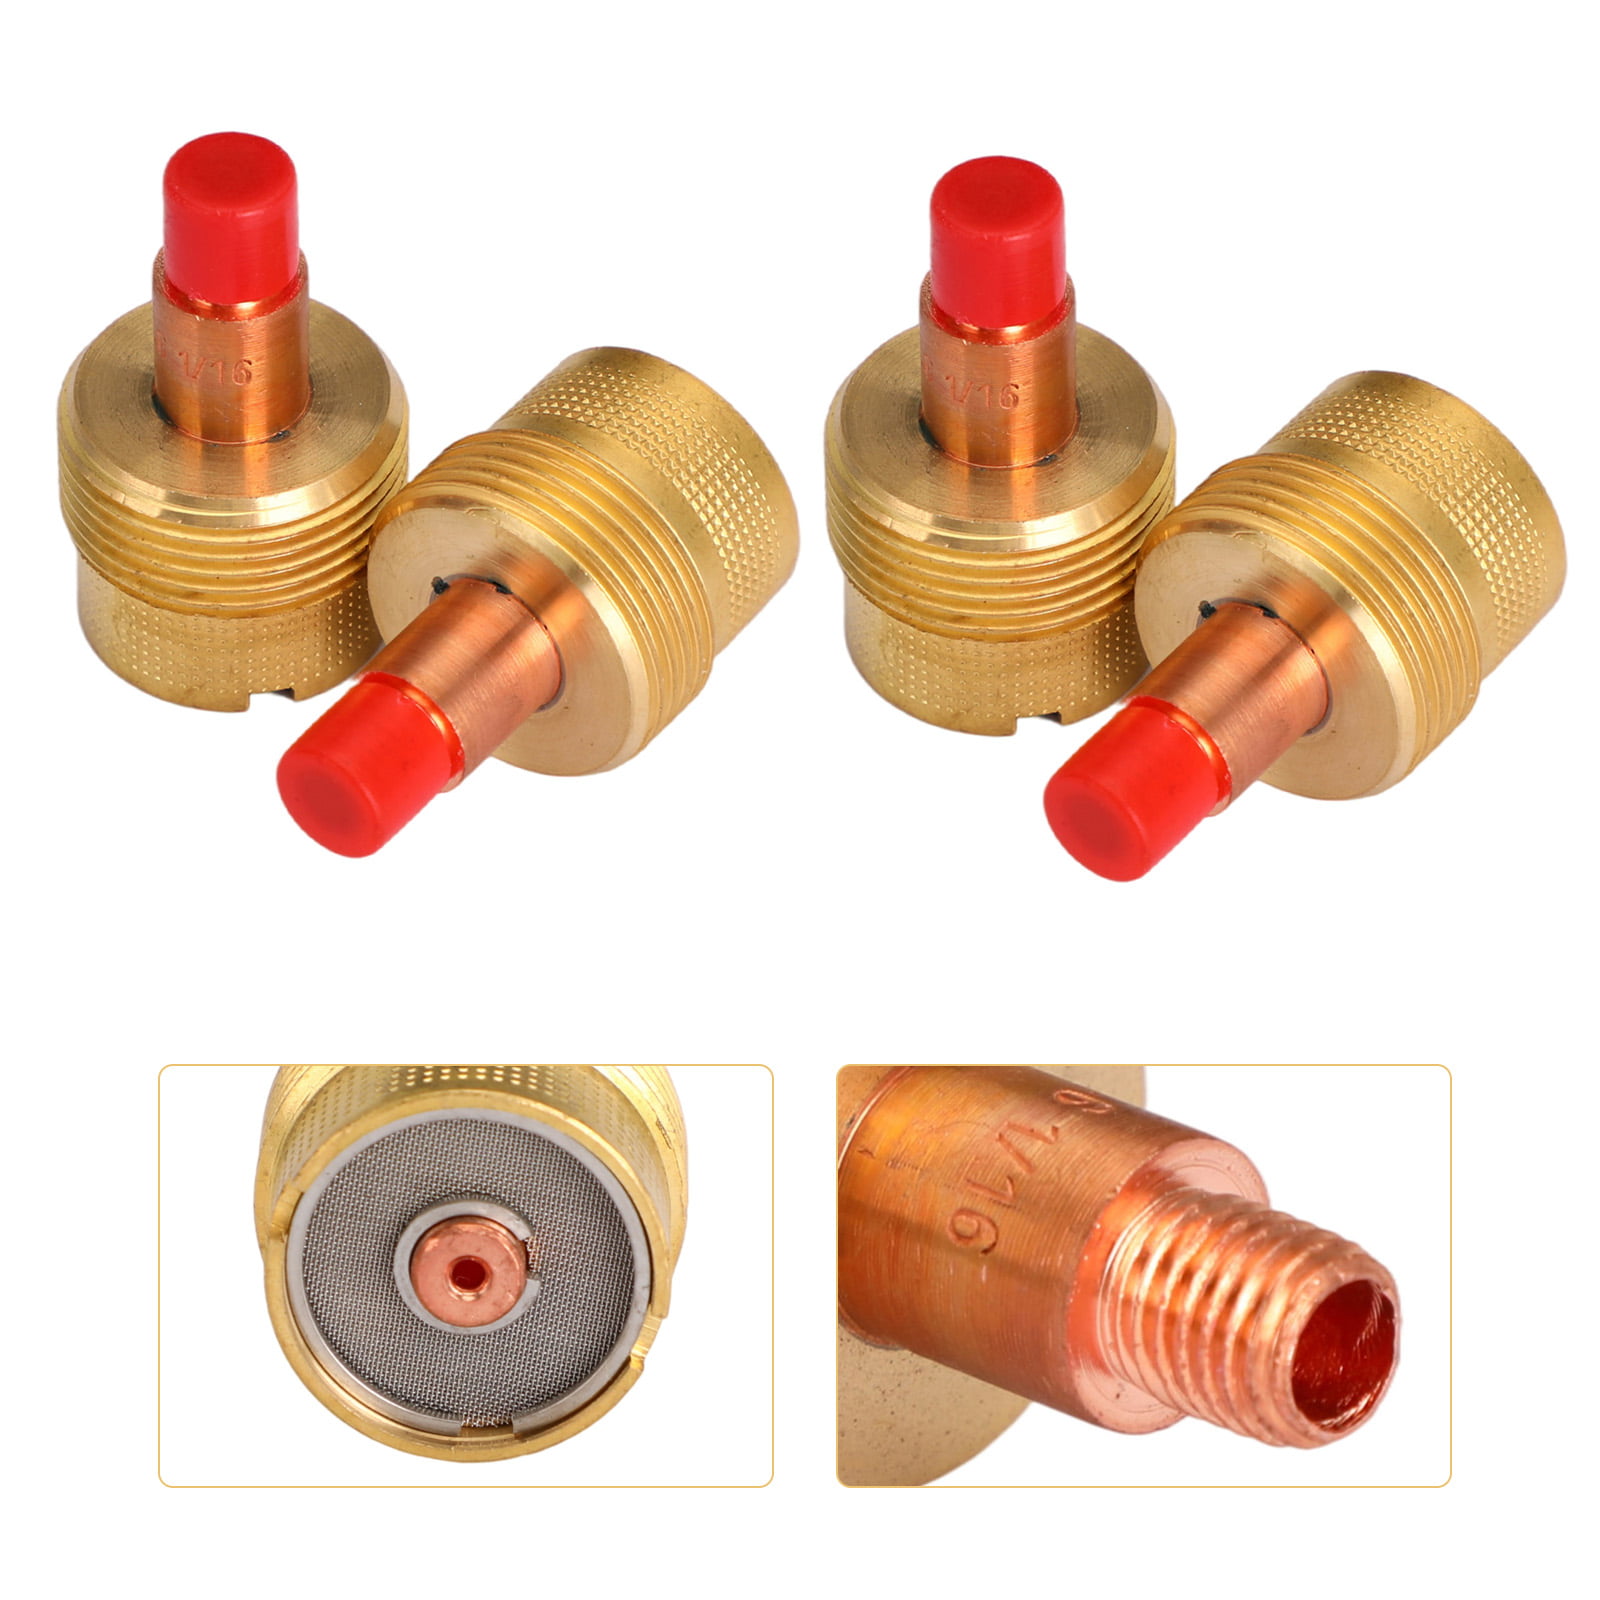 1.6mm&1/16 Collet Body WP-9 TIG Argon Arc Welding Torch Brass Collet Body TIG Welding Torches Kit Collet Body Nozzle Consumables Kit Fit Electronic Soldering Welding Accessories 